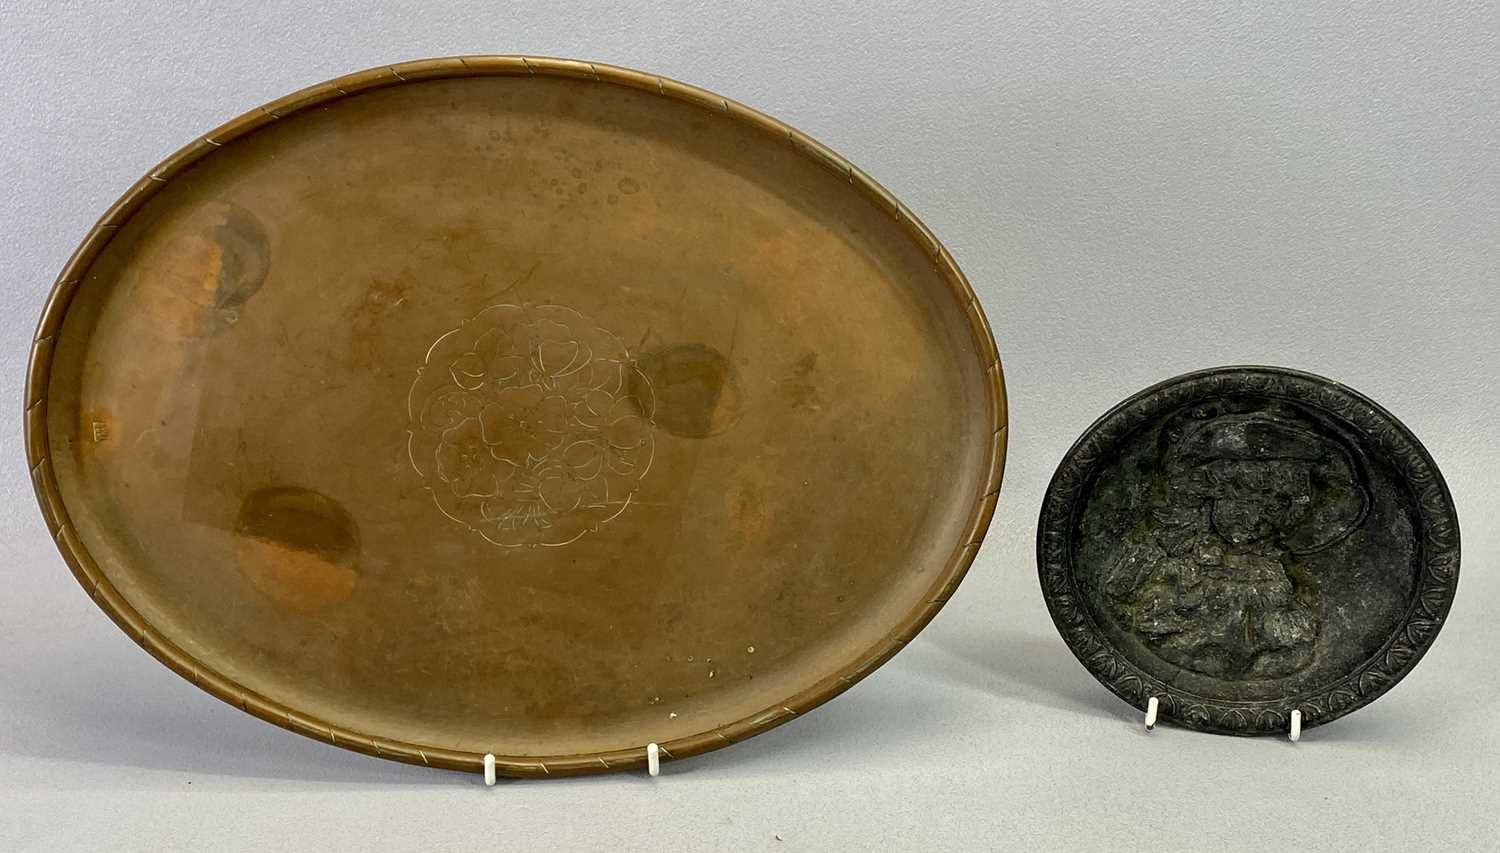 HUGH WALLIS 'ARTS & CRAFTS' OVAL PLANISHED COPPER TRAY - with raised rope twist edge, stylised